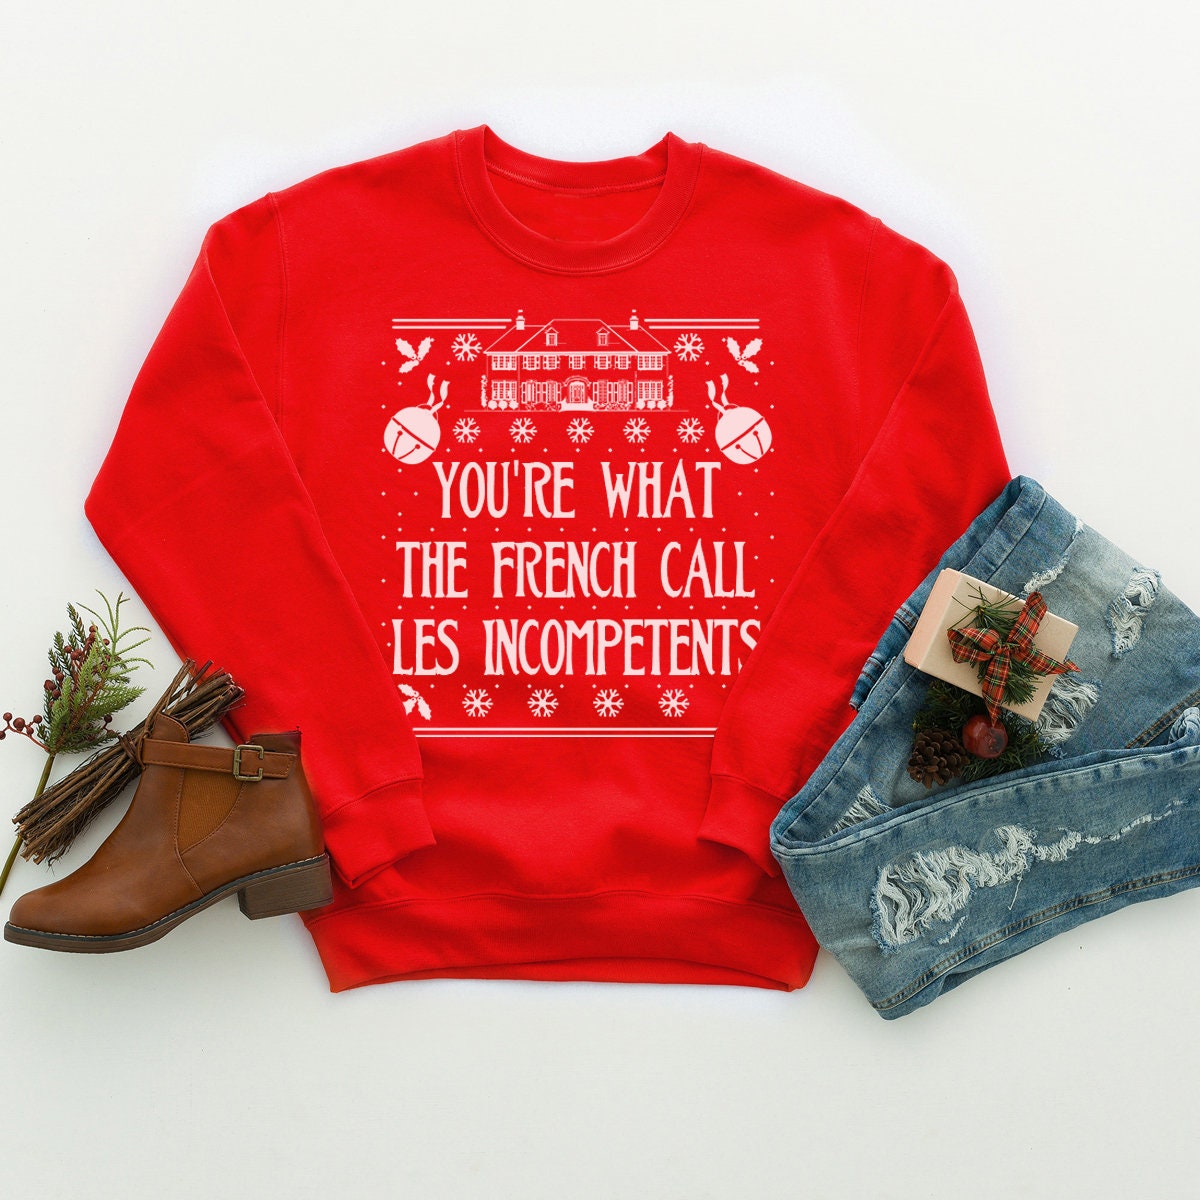 Discover Home Alone Sweatshirt, Christmas Movie Sweatshirt, You're What the French Call Les Incompetents, Home Alone Sweatshirts